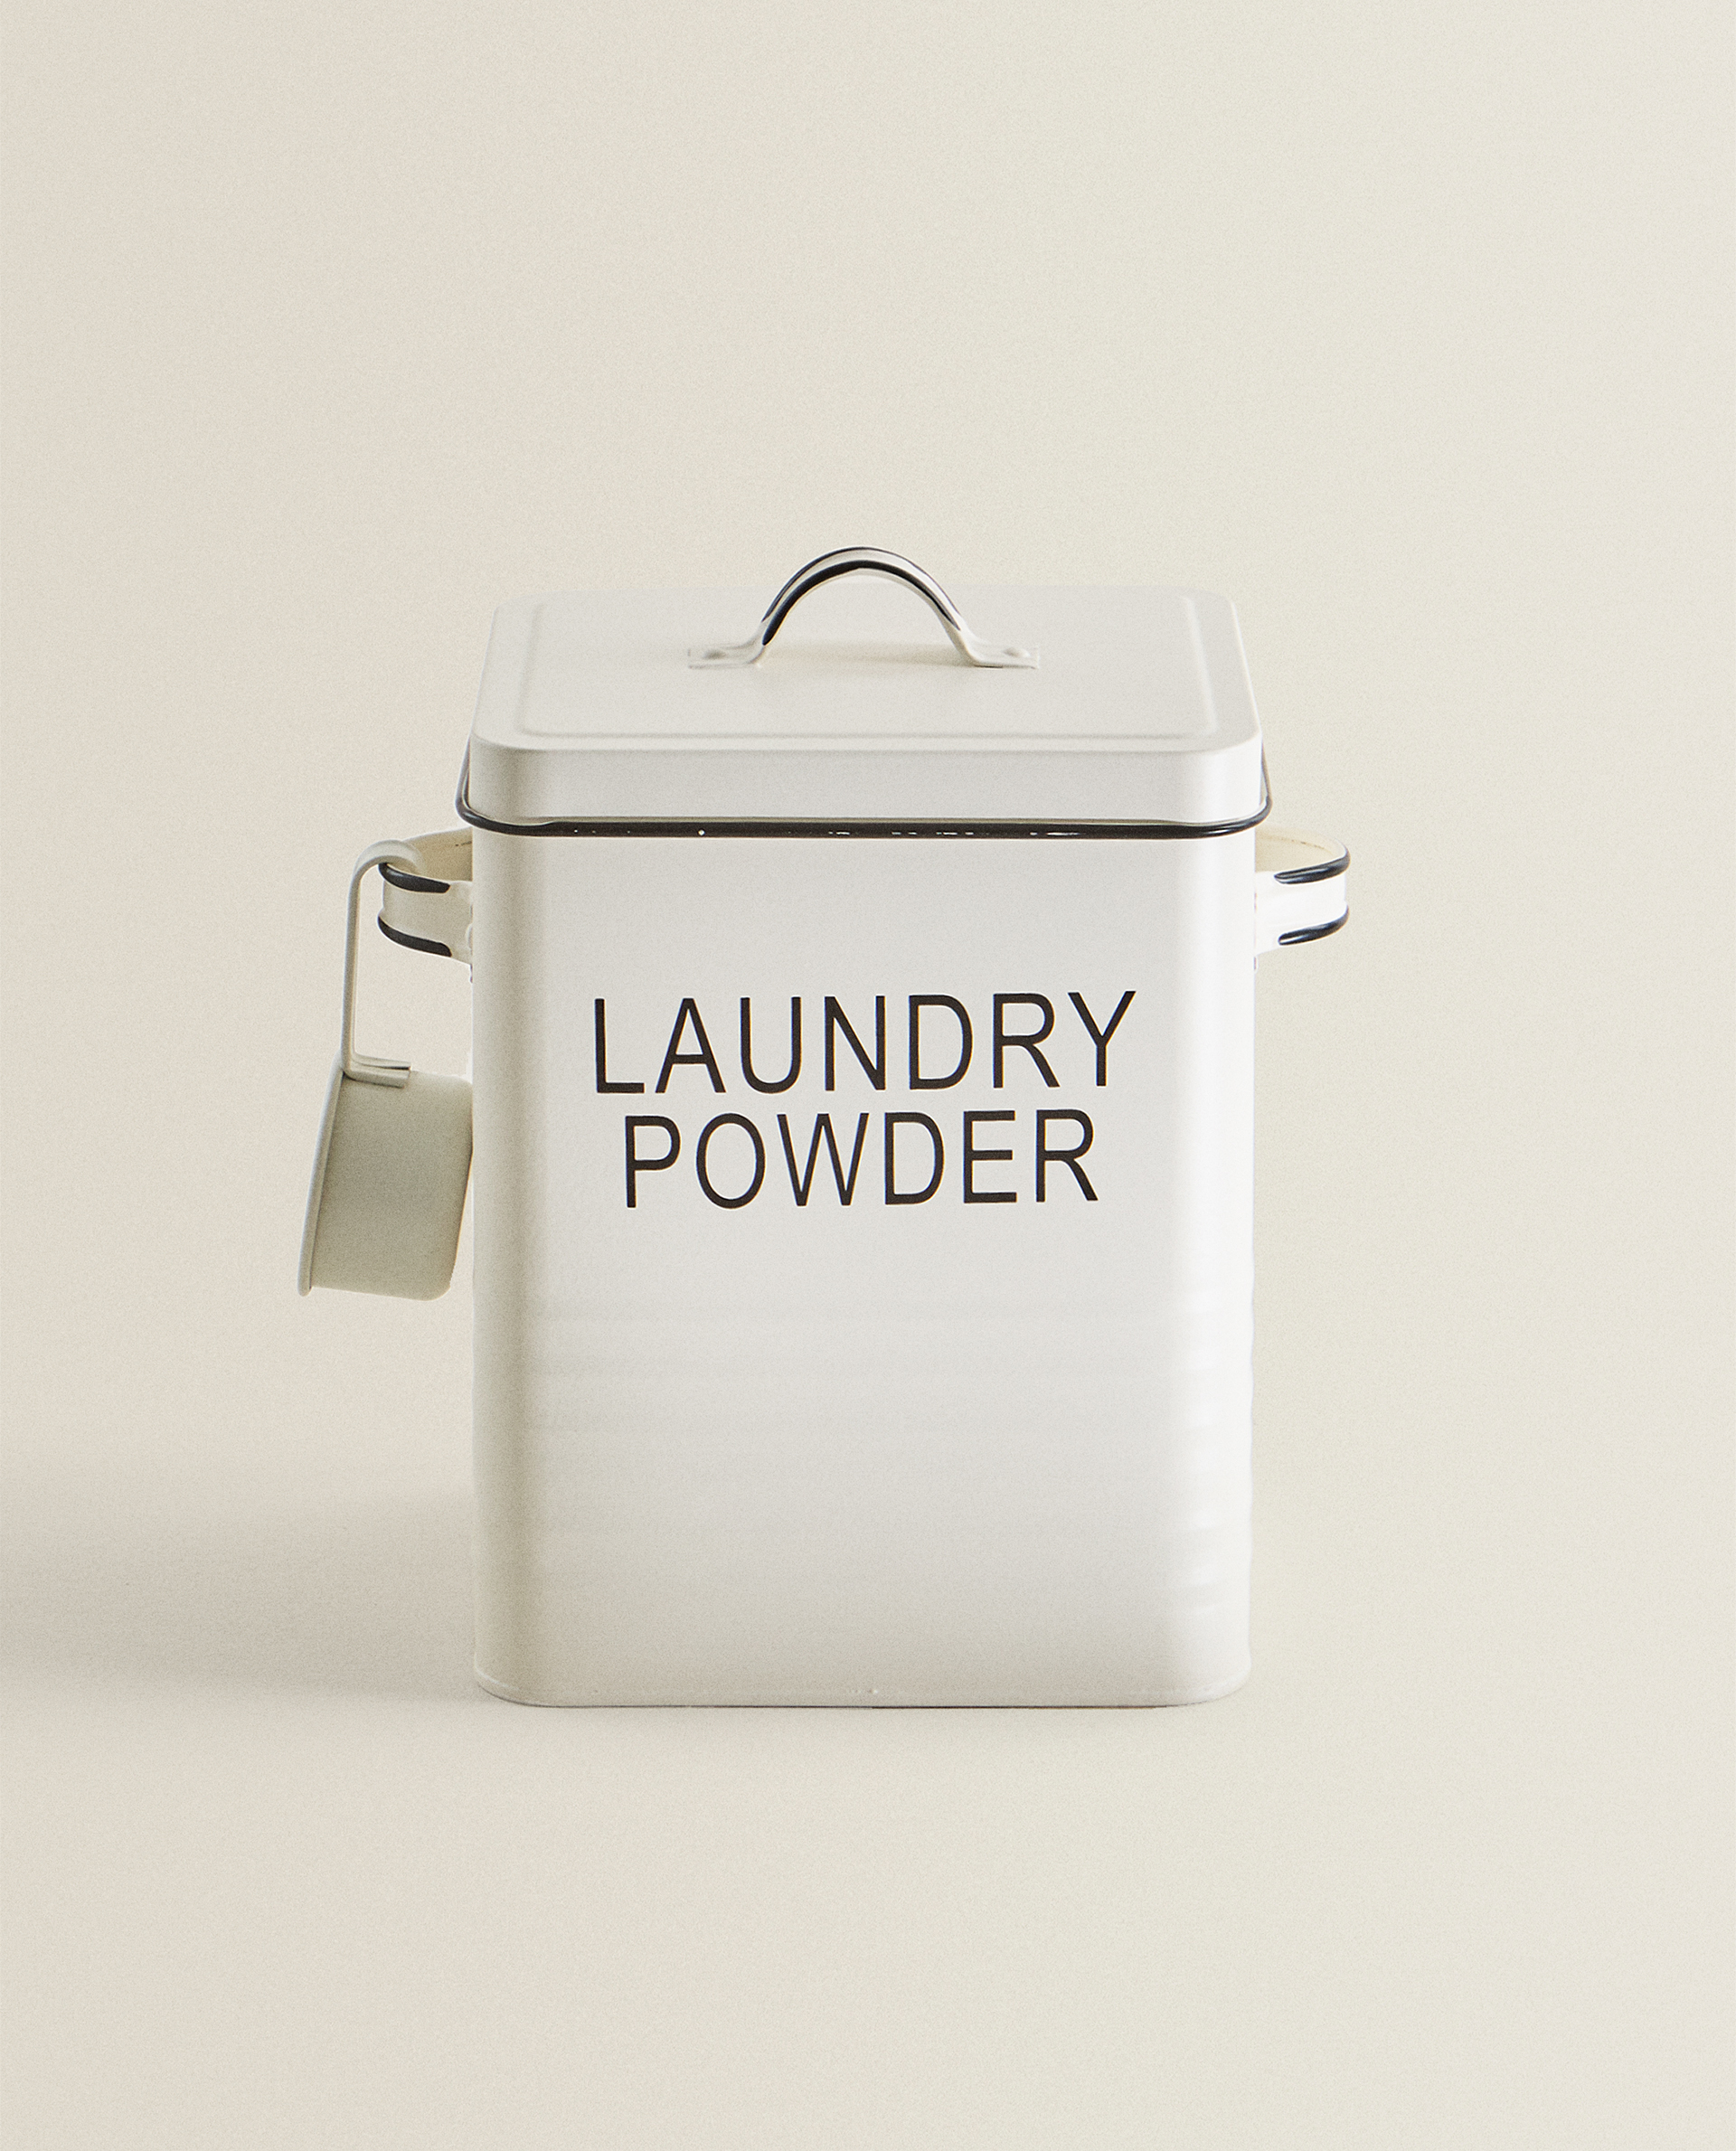 LAUNDRY POWDER CONTAINER - LAUNDRY CARE 